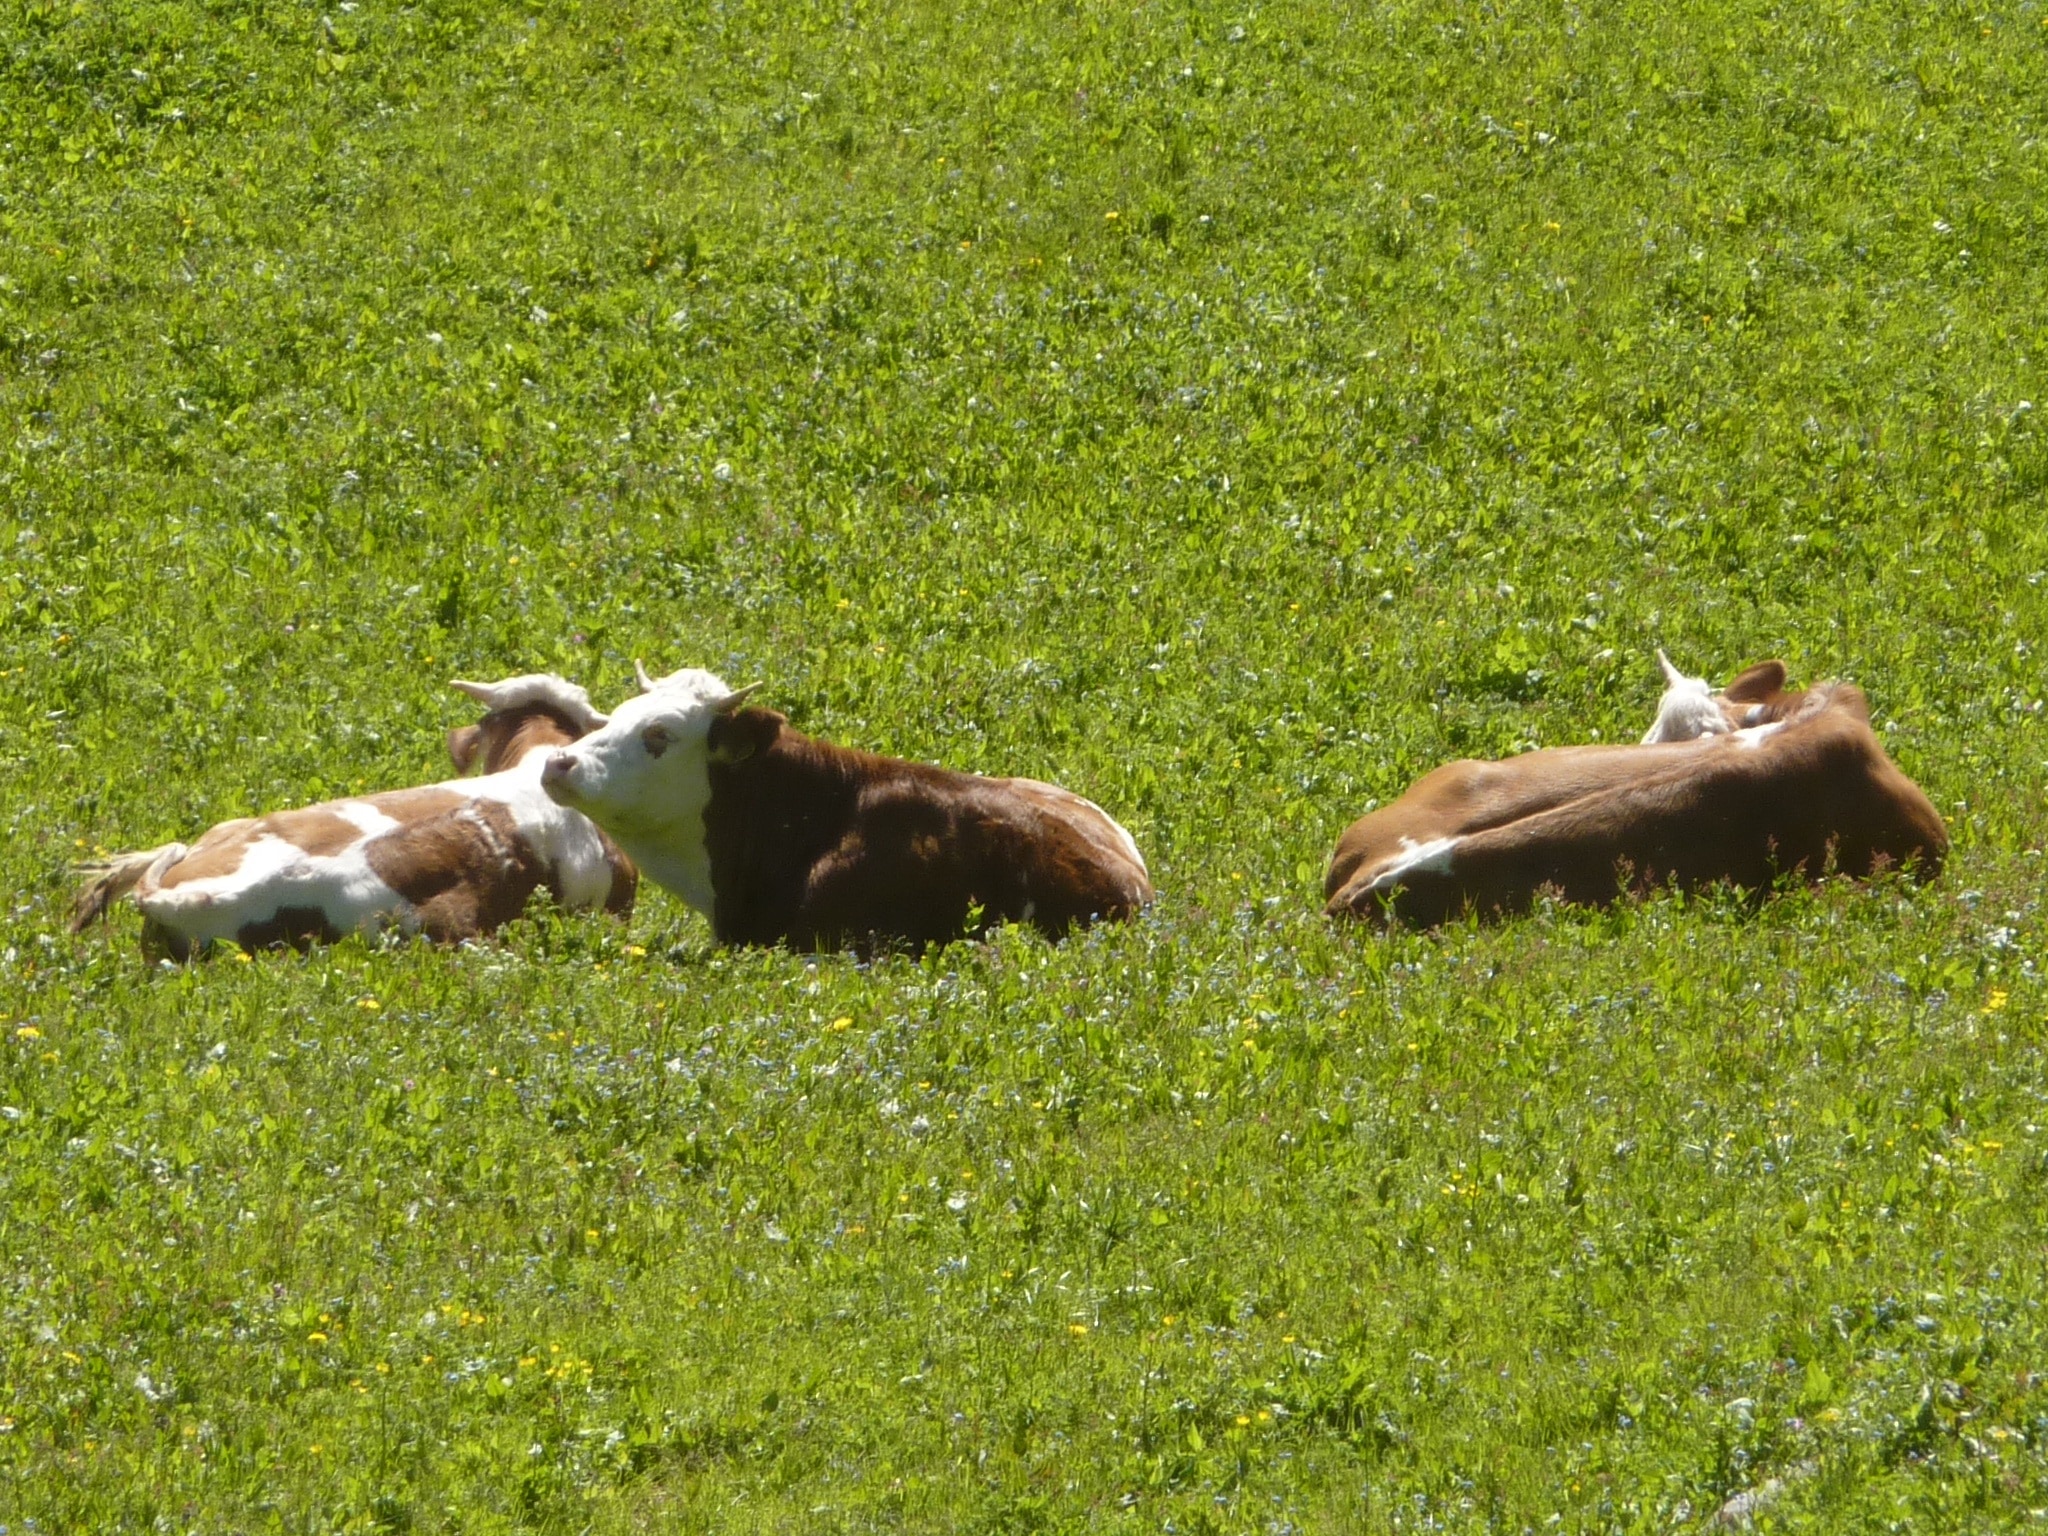 two brown-and-white cows